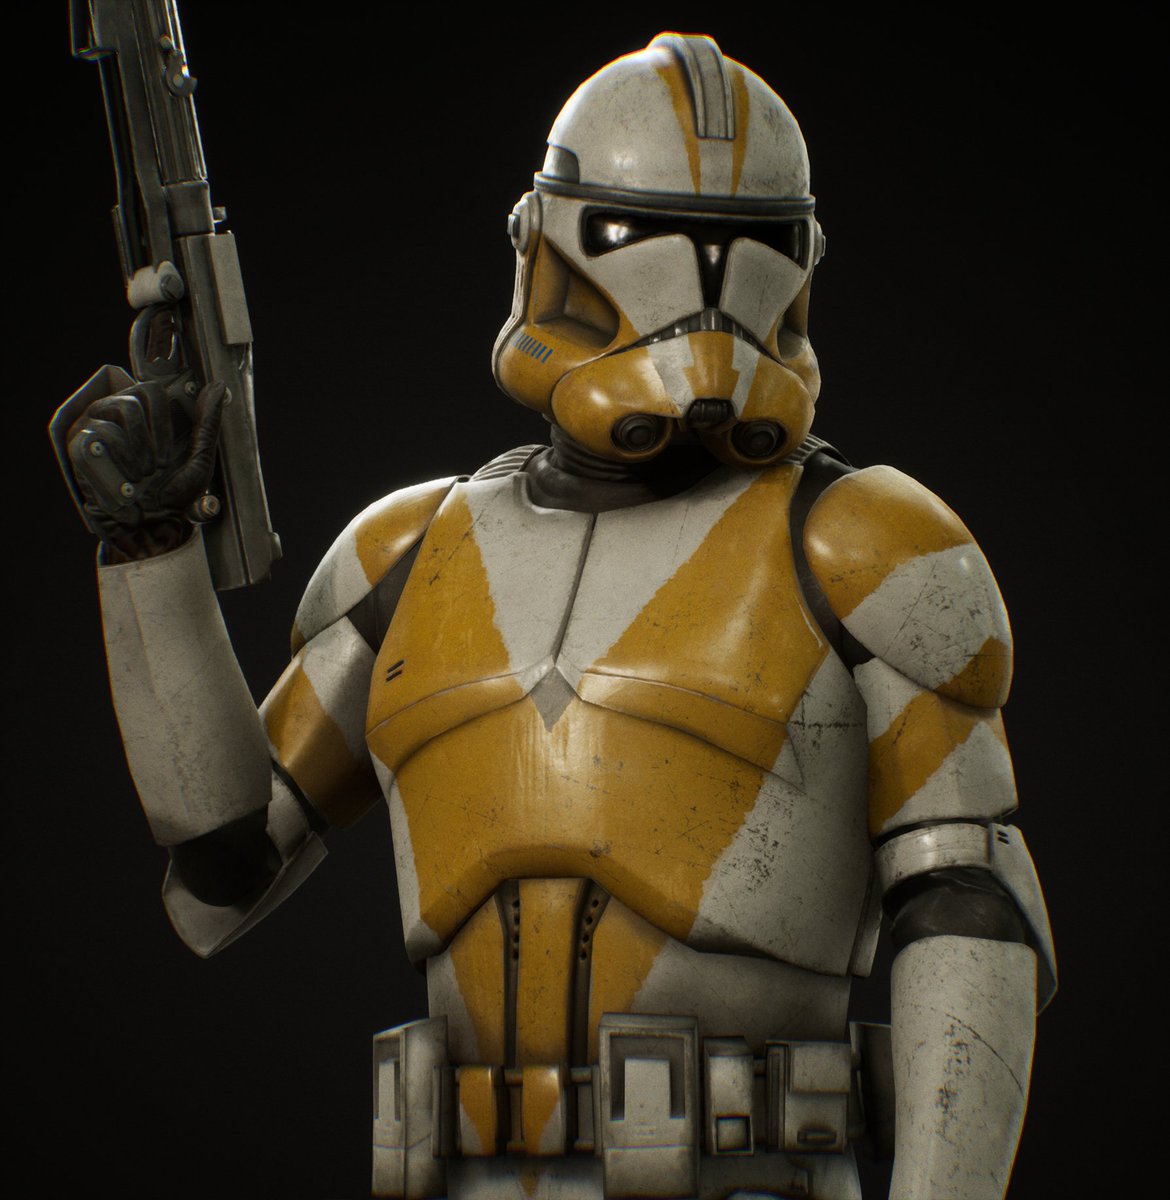 Phase 2 Clone Troopers have to be my favorite design from Star Wars.